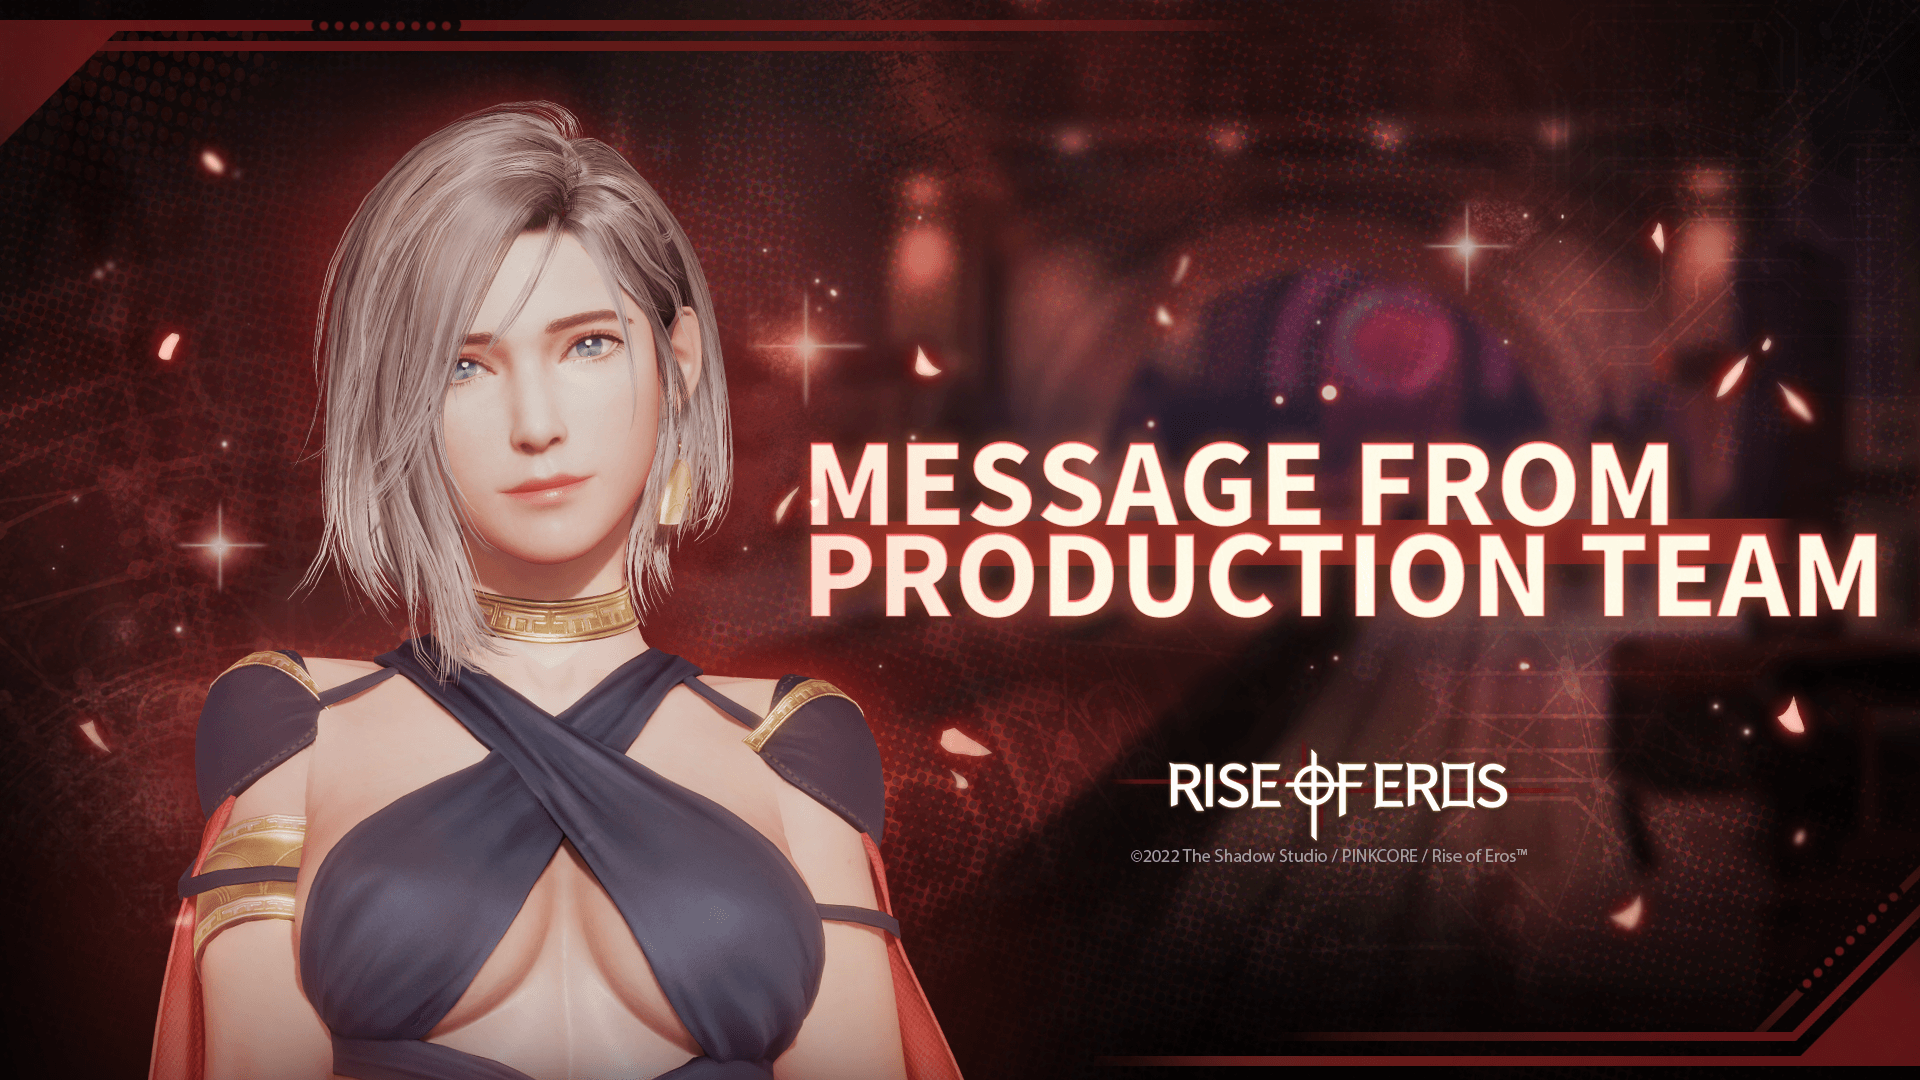 A Message from the Production Team